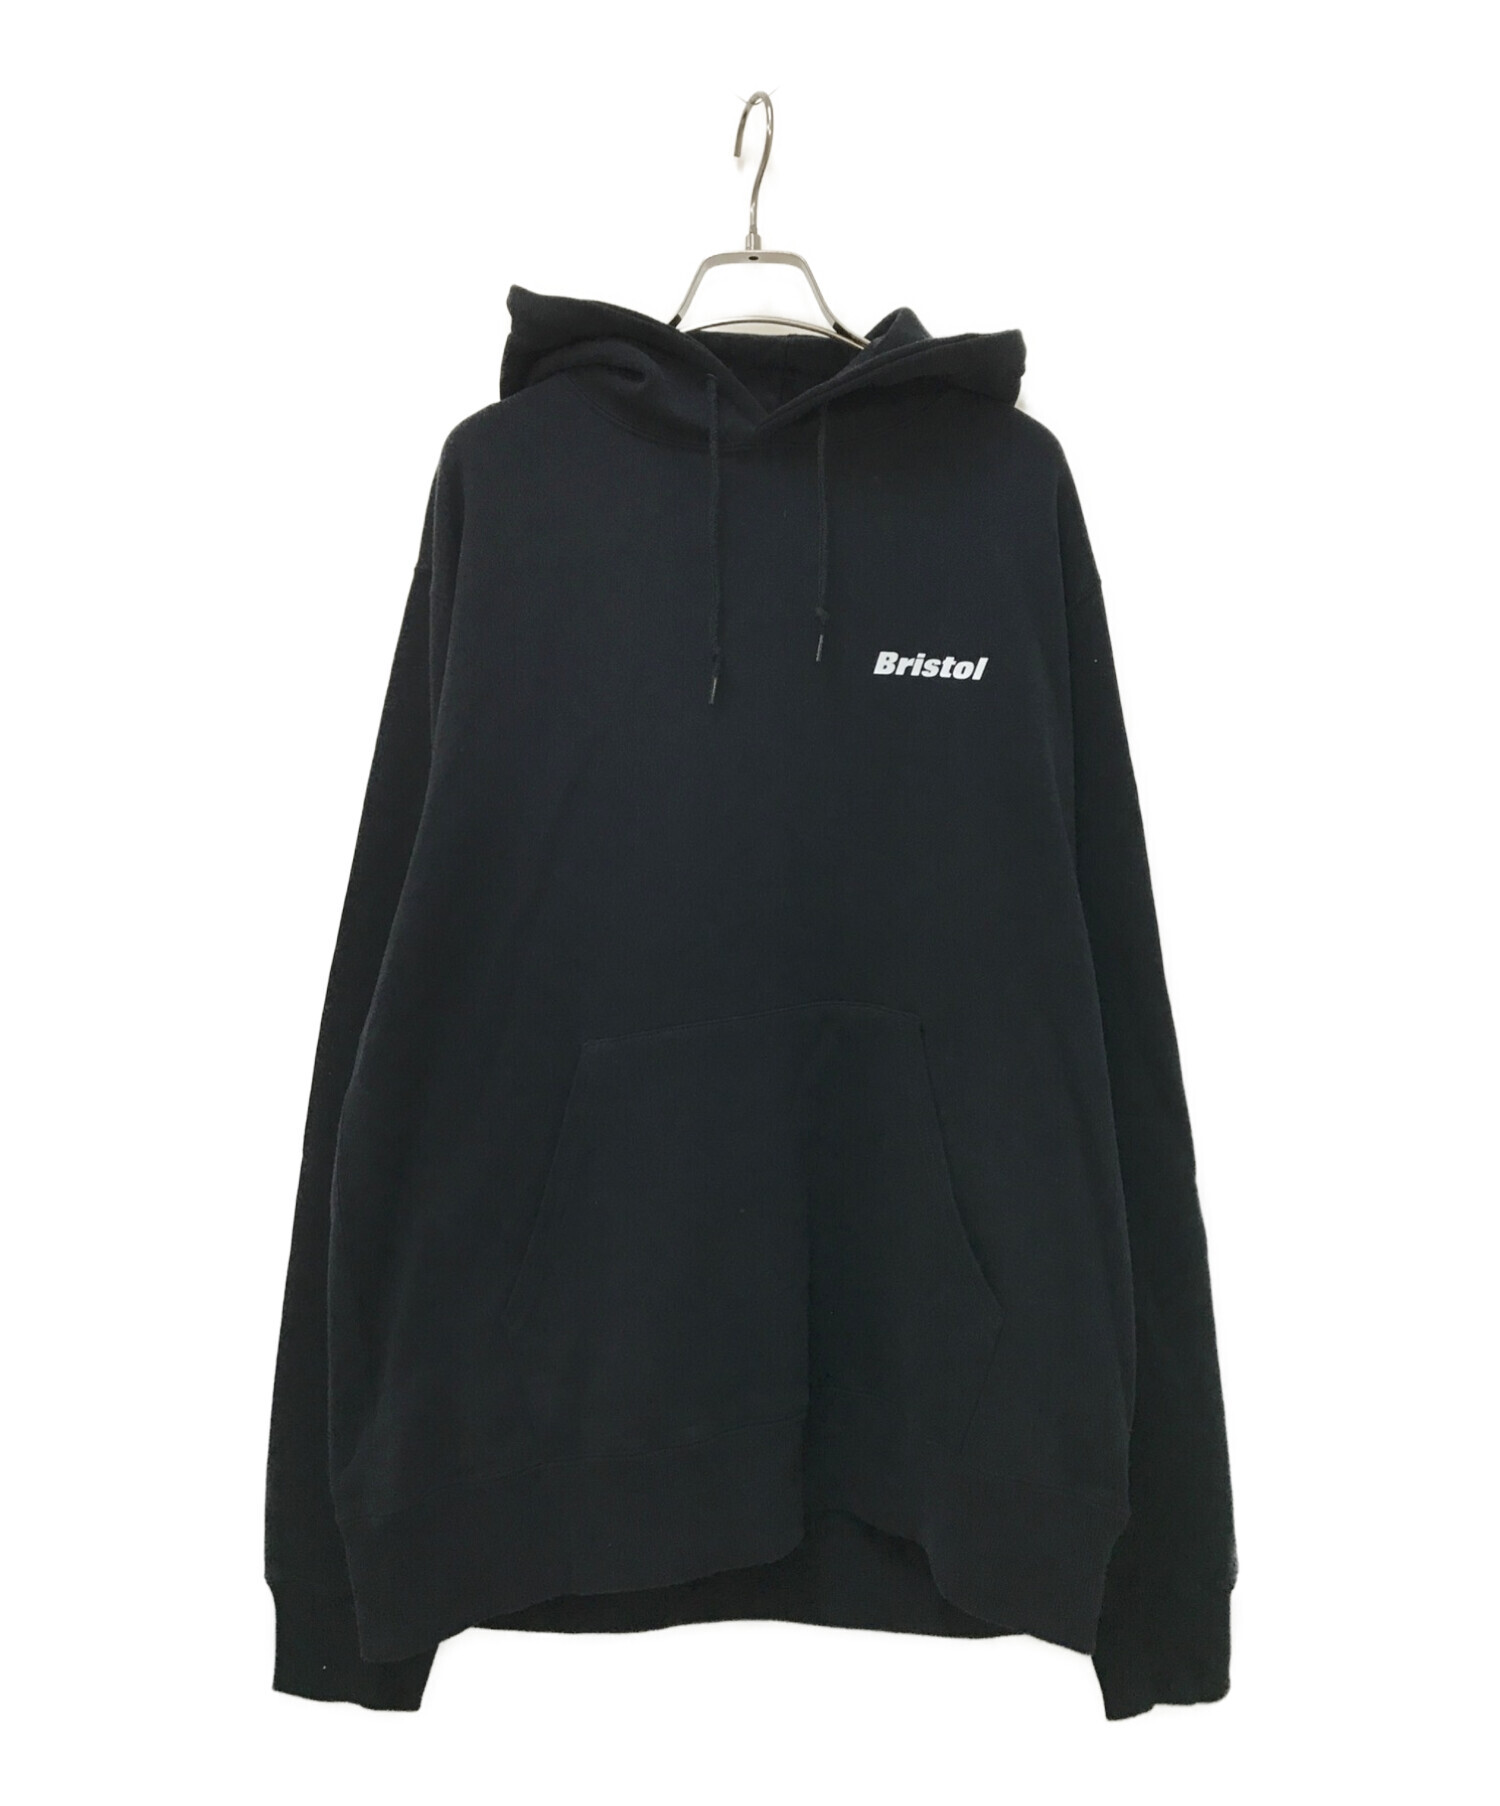 FCRB AUTHENTIC LOGO SWEAT HOODIE | nate-hospital.com